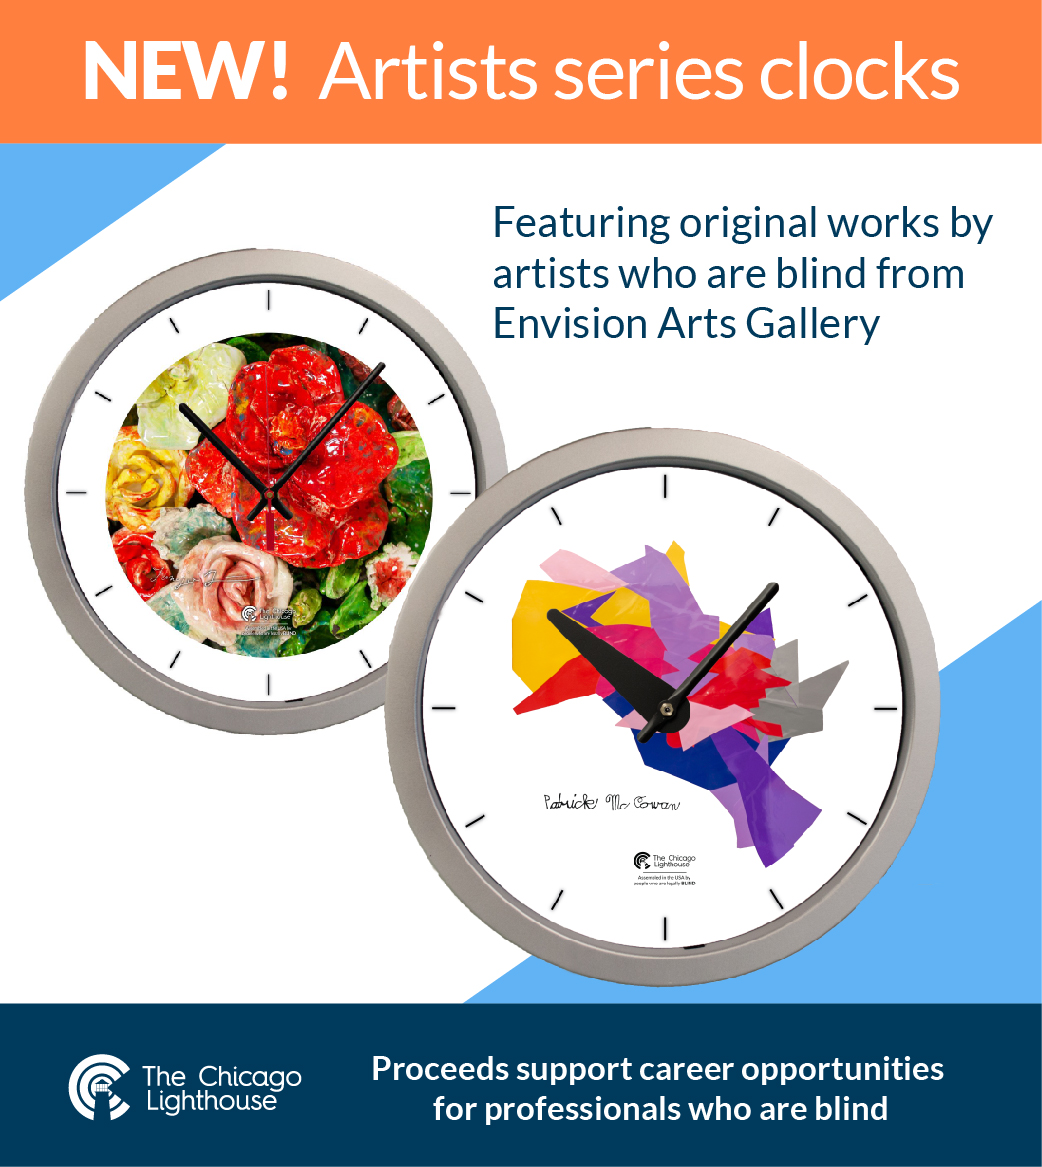 Two clocks display with artwork from Envision artists. Text says, NEW! Artists series clocks featuring original works by artists who are blind from Envision Arts Gallery. Proceeds support career opportunities for professionals who are blind. 